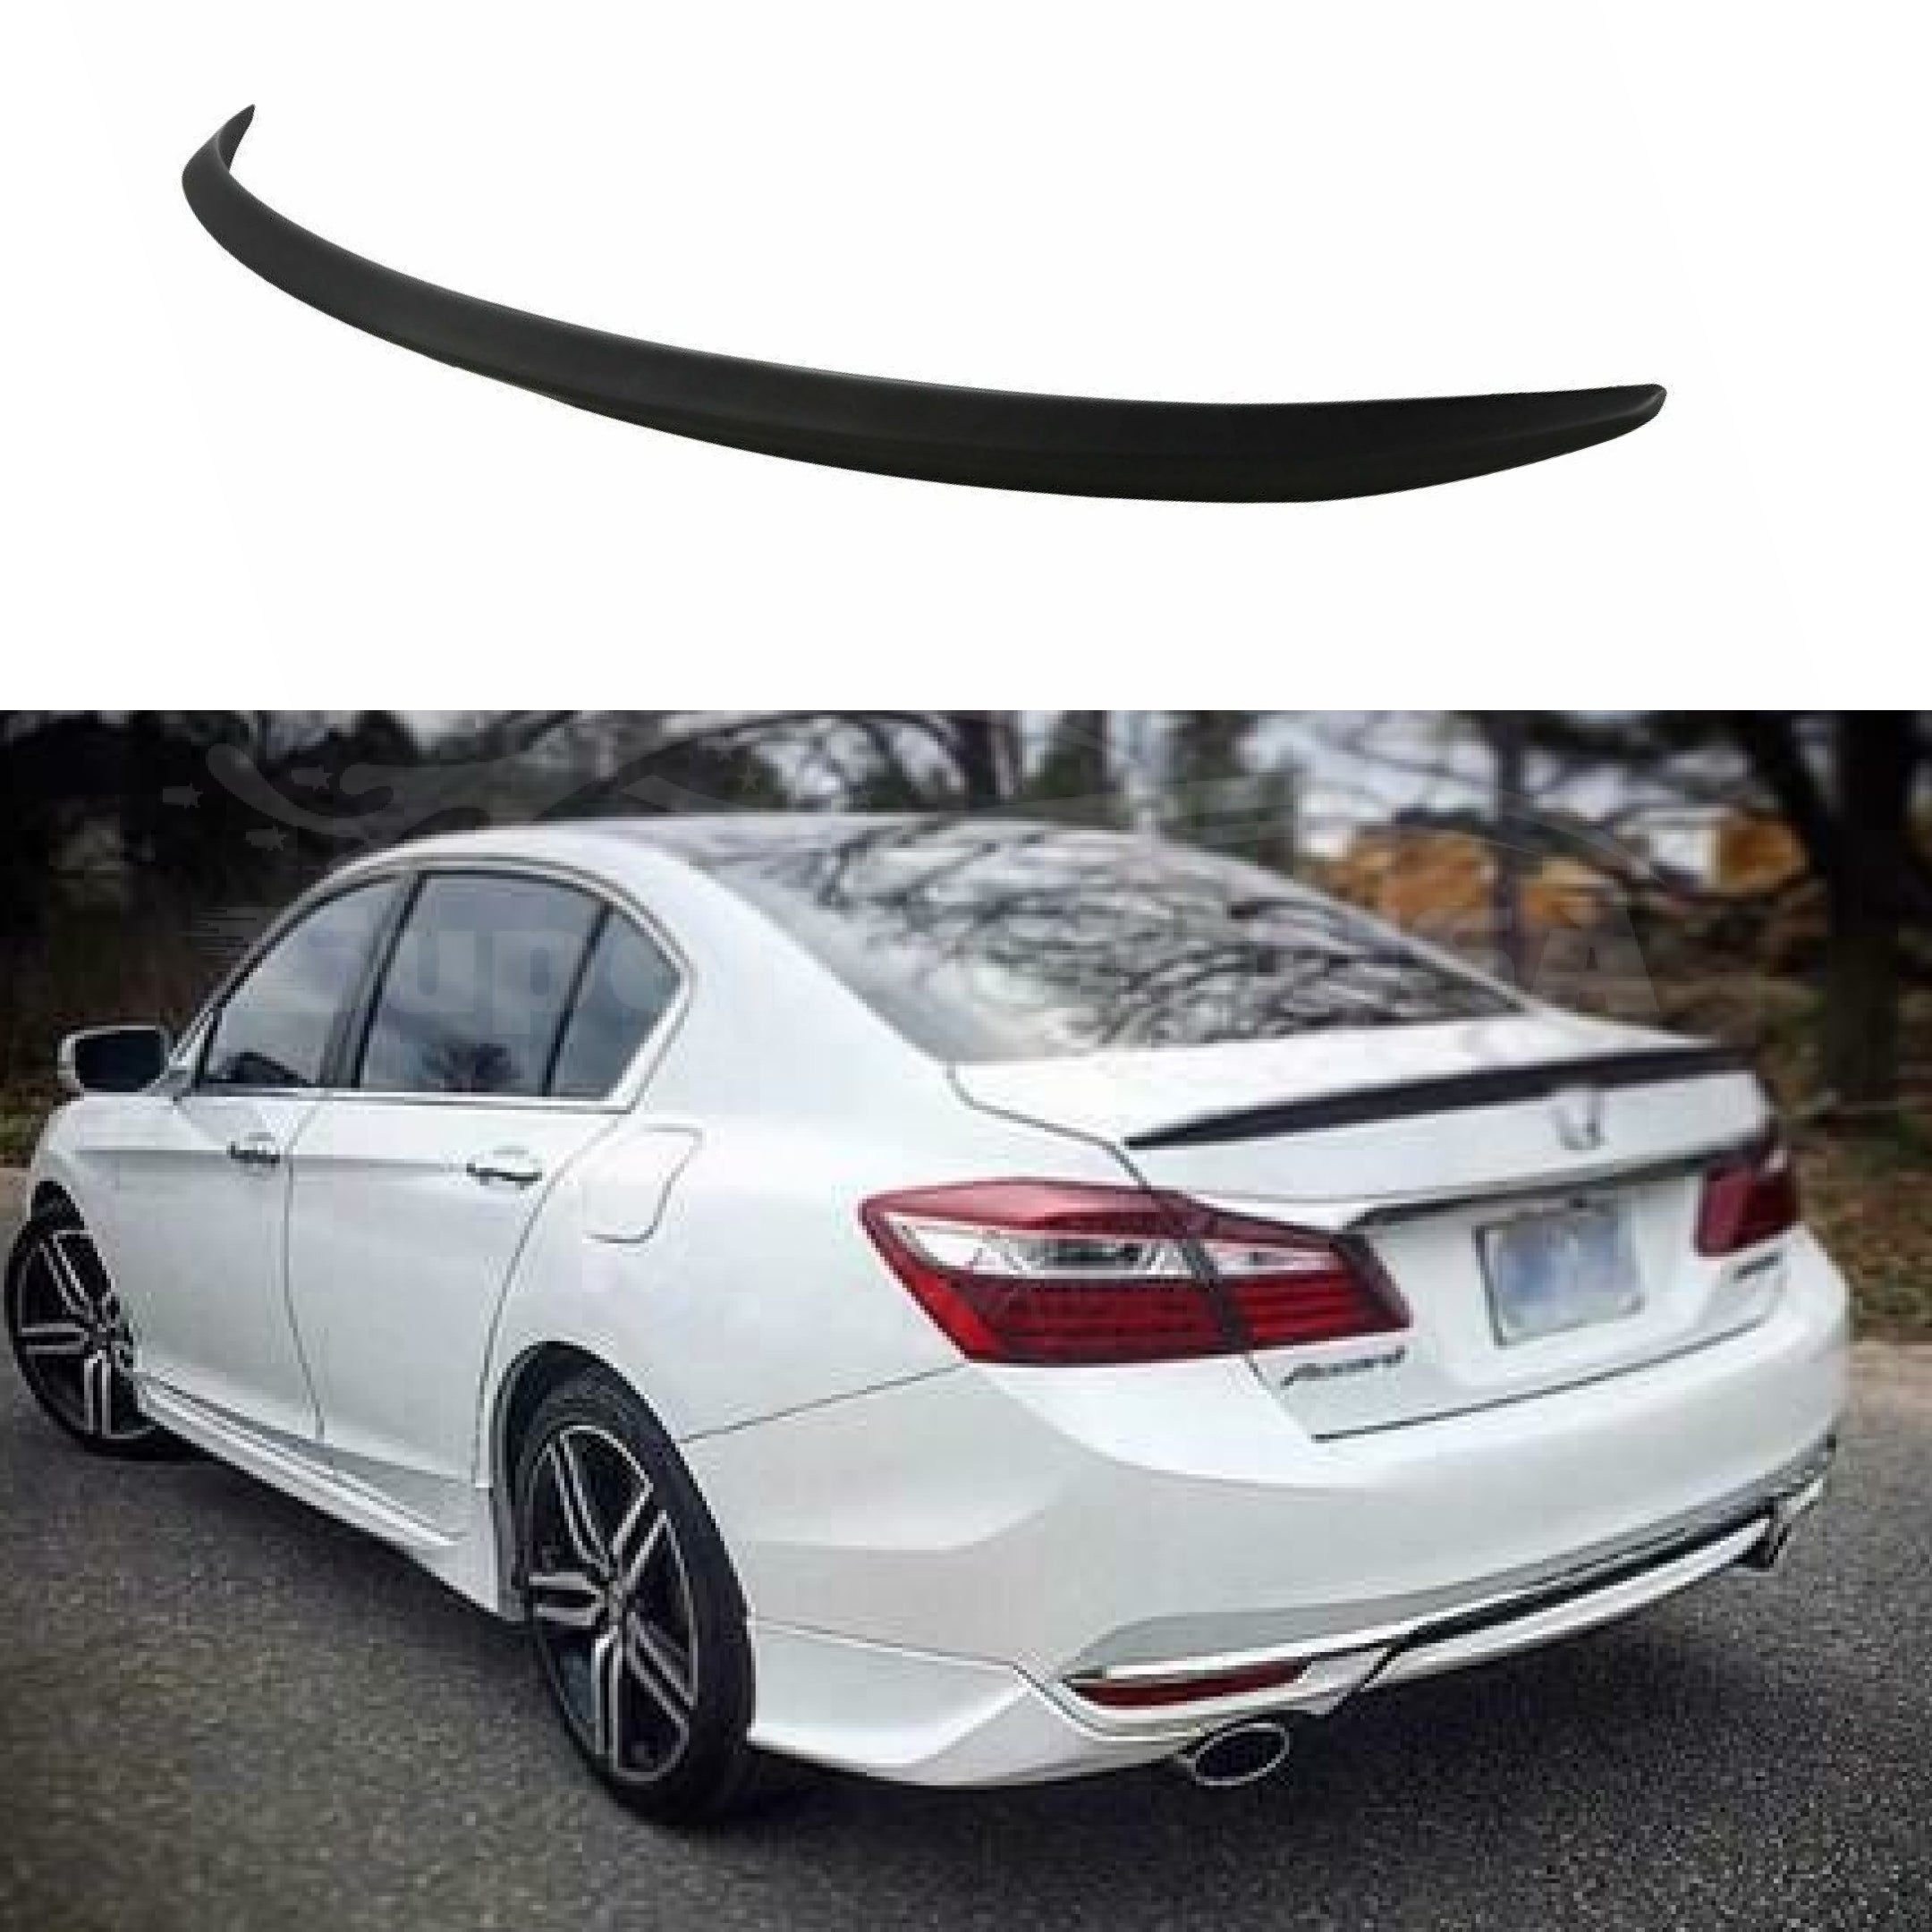 Fit For 2013-2017 Honda Accord 4DR OE Factory Style Spoiler Wing  (Unpainted / Matte Black)